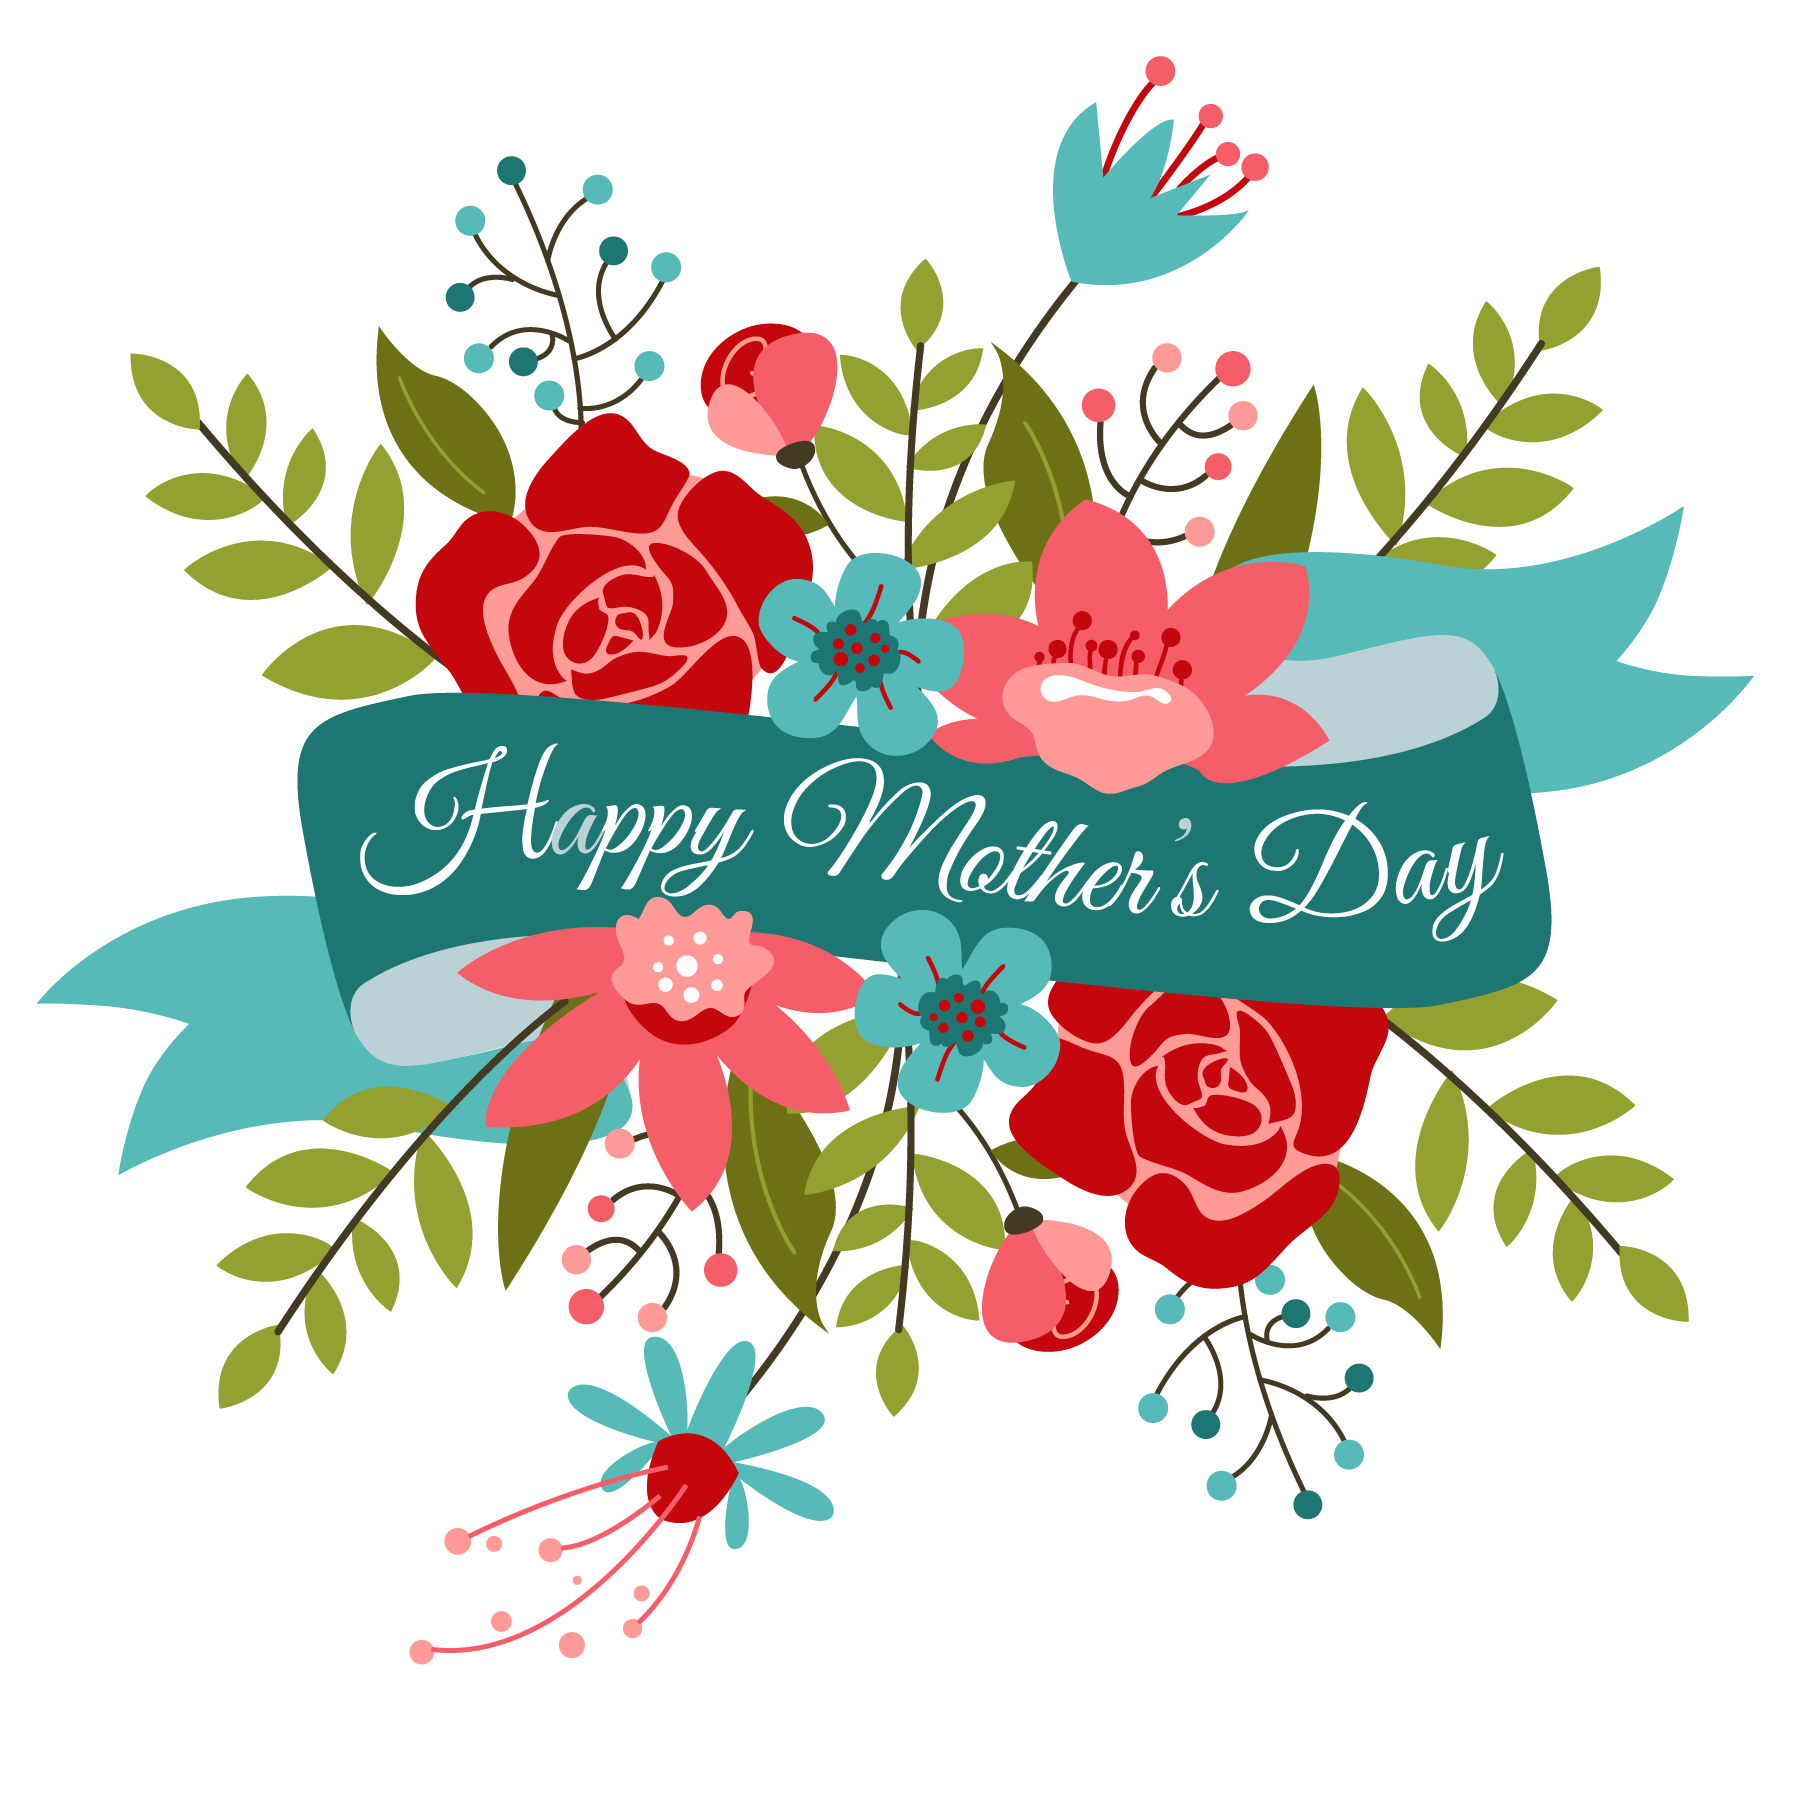 Free Mother S Day Png Transparent Images Download Free Mother S Day Png Transparent Images Png Images Free Cliparts On Clipart Library